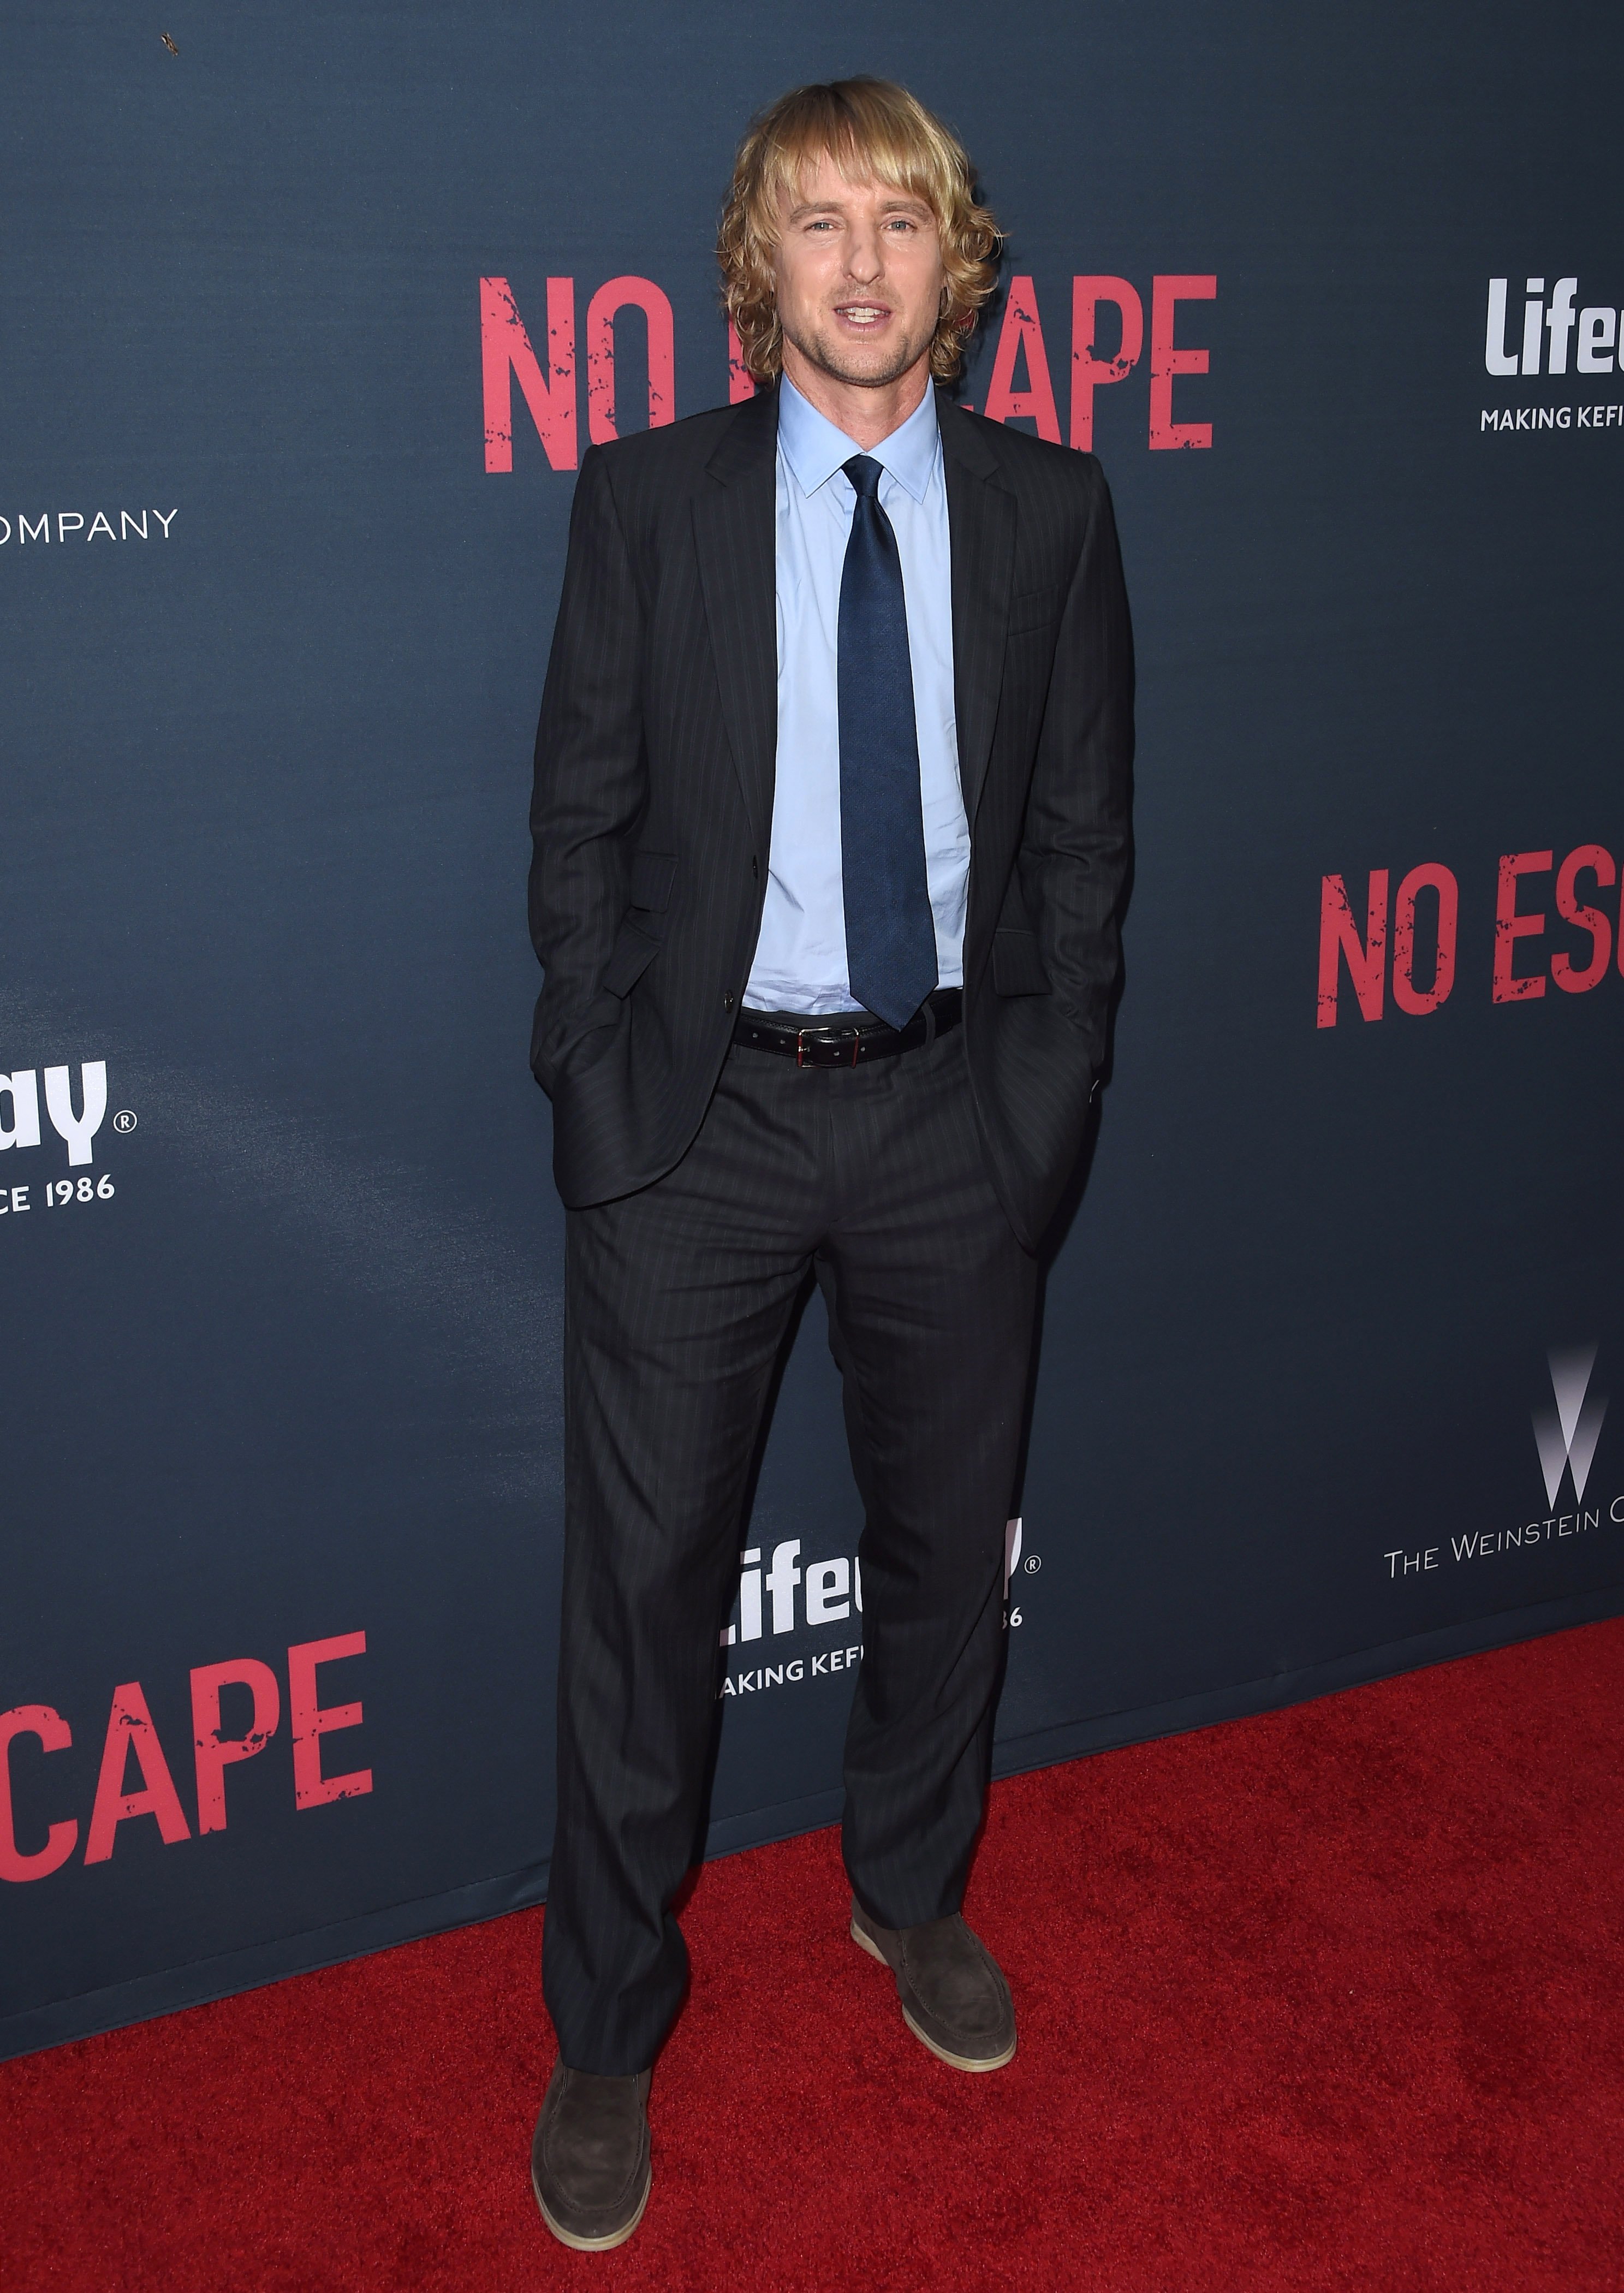 Actor Owen Wilson arrives at the premiere of The Weinstein Company's 'No Escape' at Regal Cinemas L.A. Live on August 17, 2015 in Los Angeles, California | Source: Getty Source